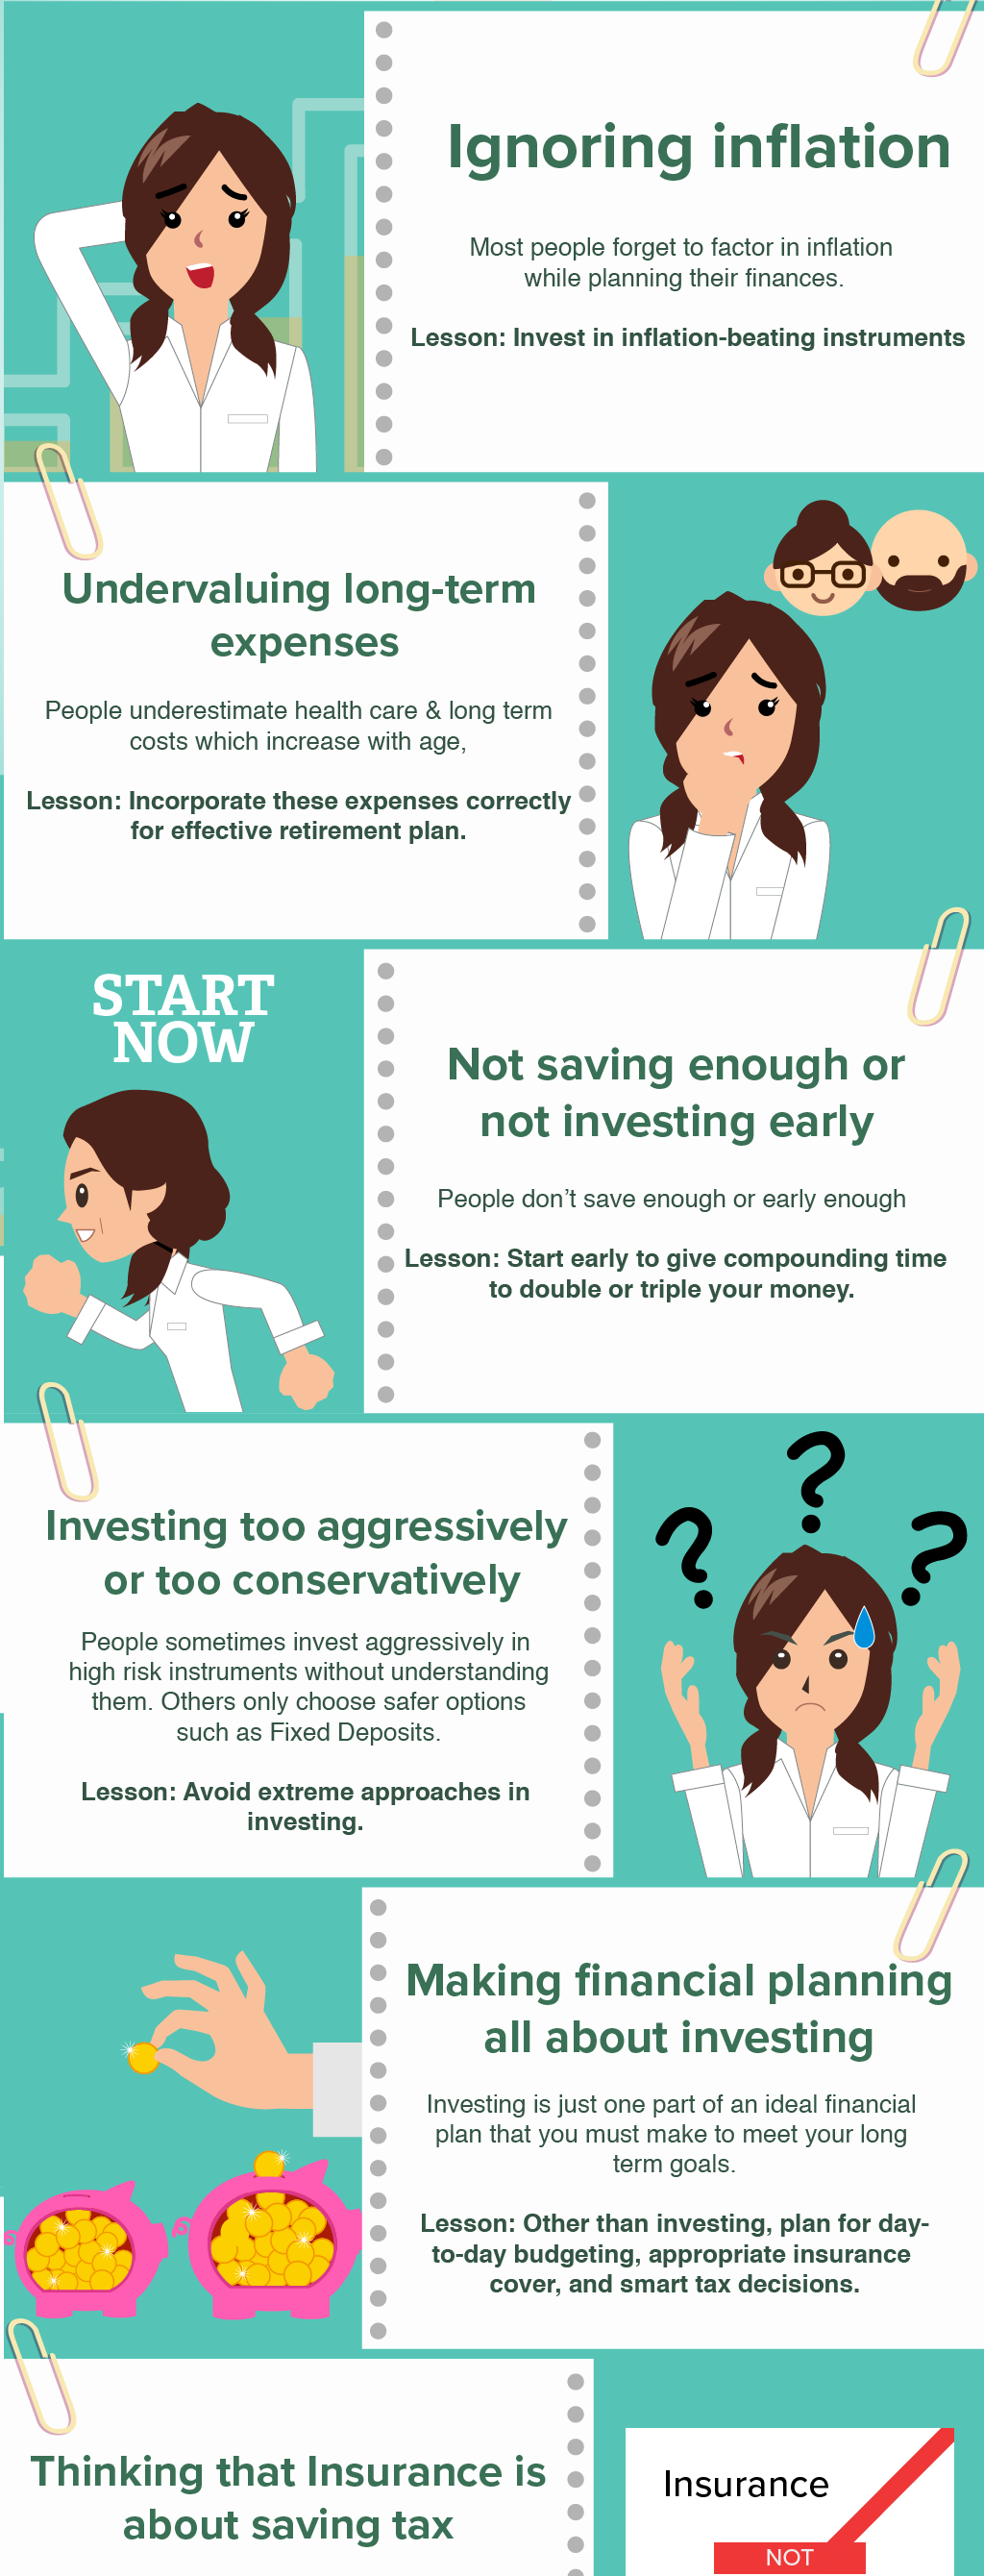 6 Most Common Financial Mistakes